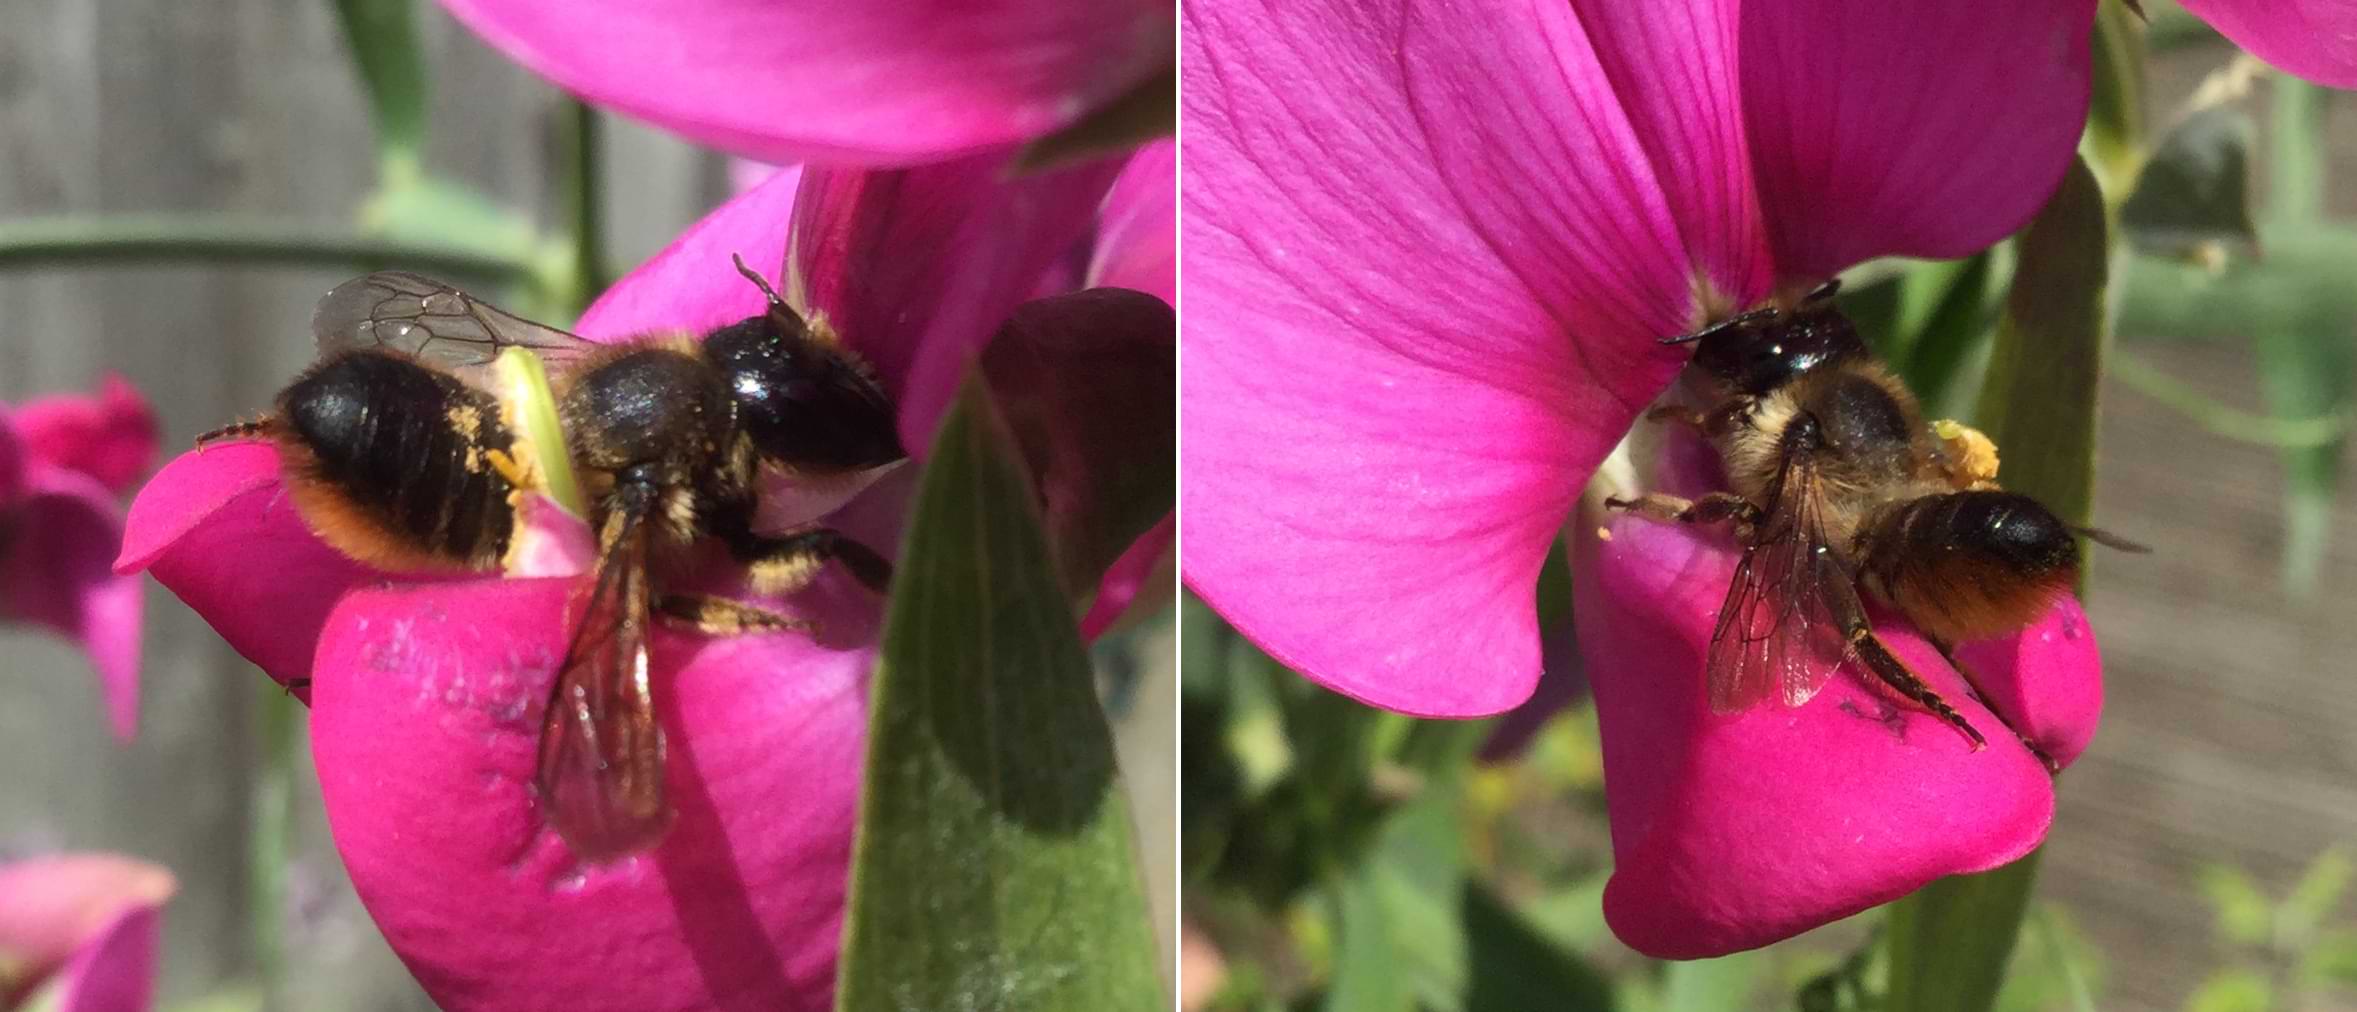 A bee feeding from a pink flower. One of the flower's curved stamen is brushing pollen onto the bee's back.